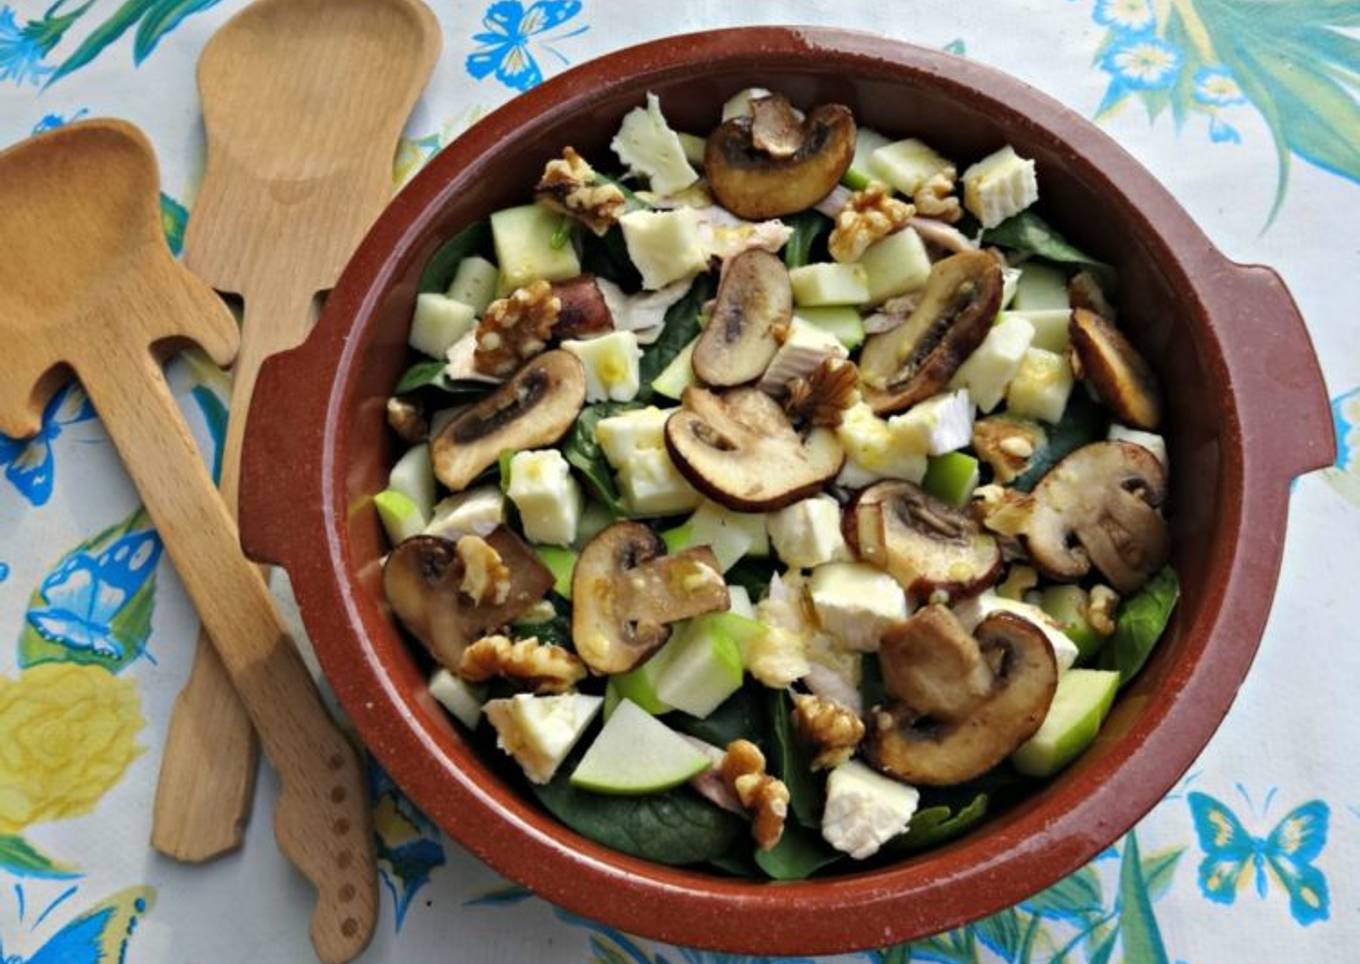 Camembert salad with walnuts and apple